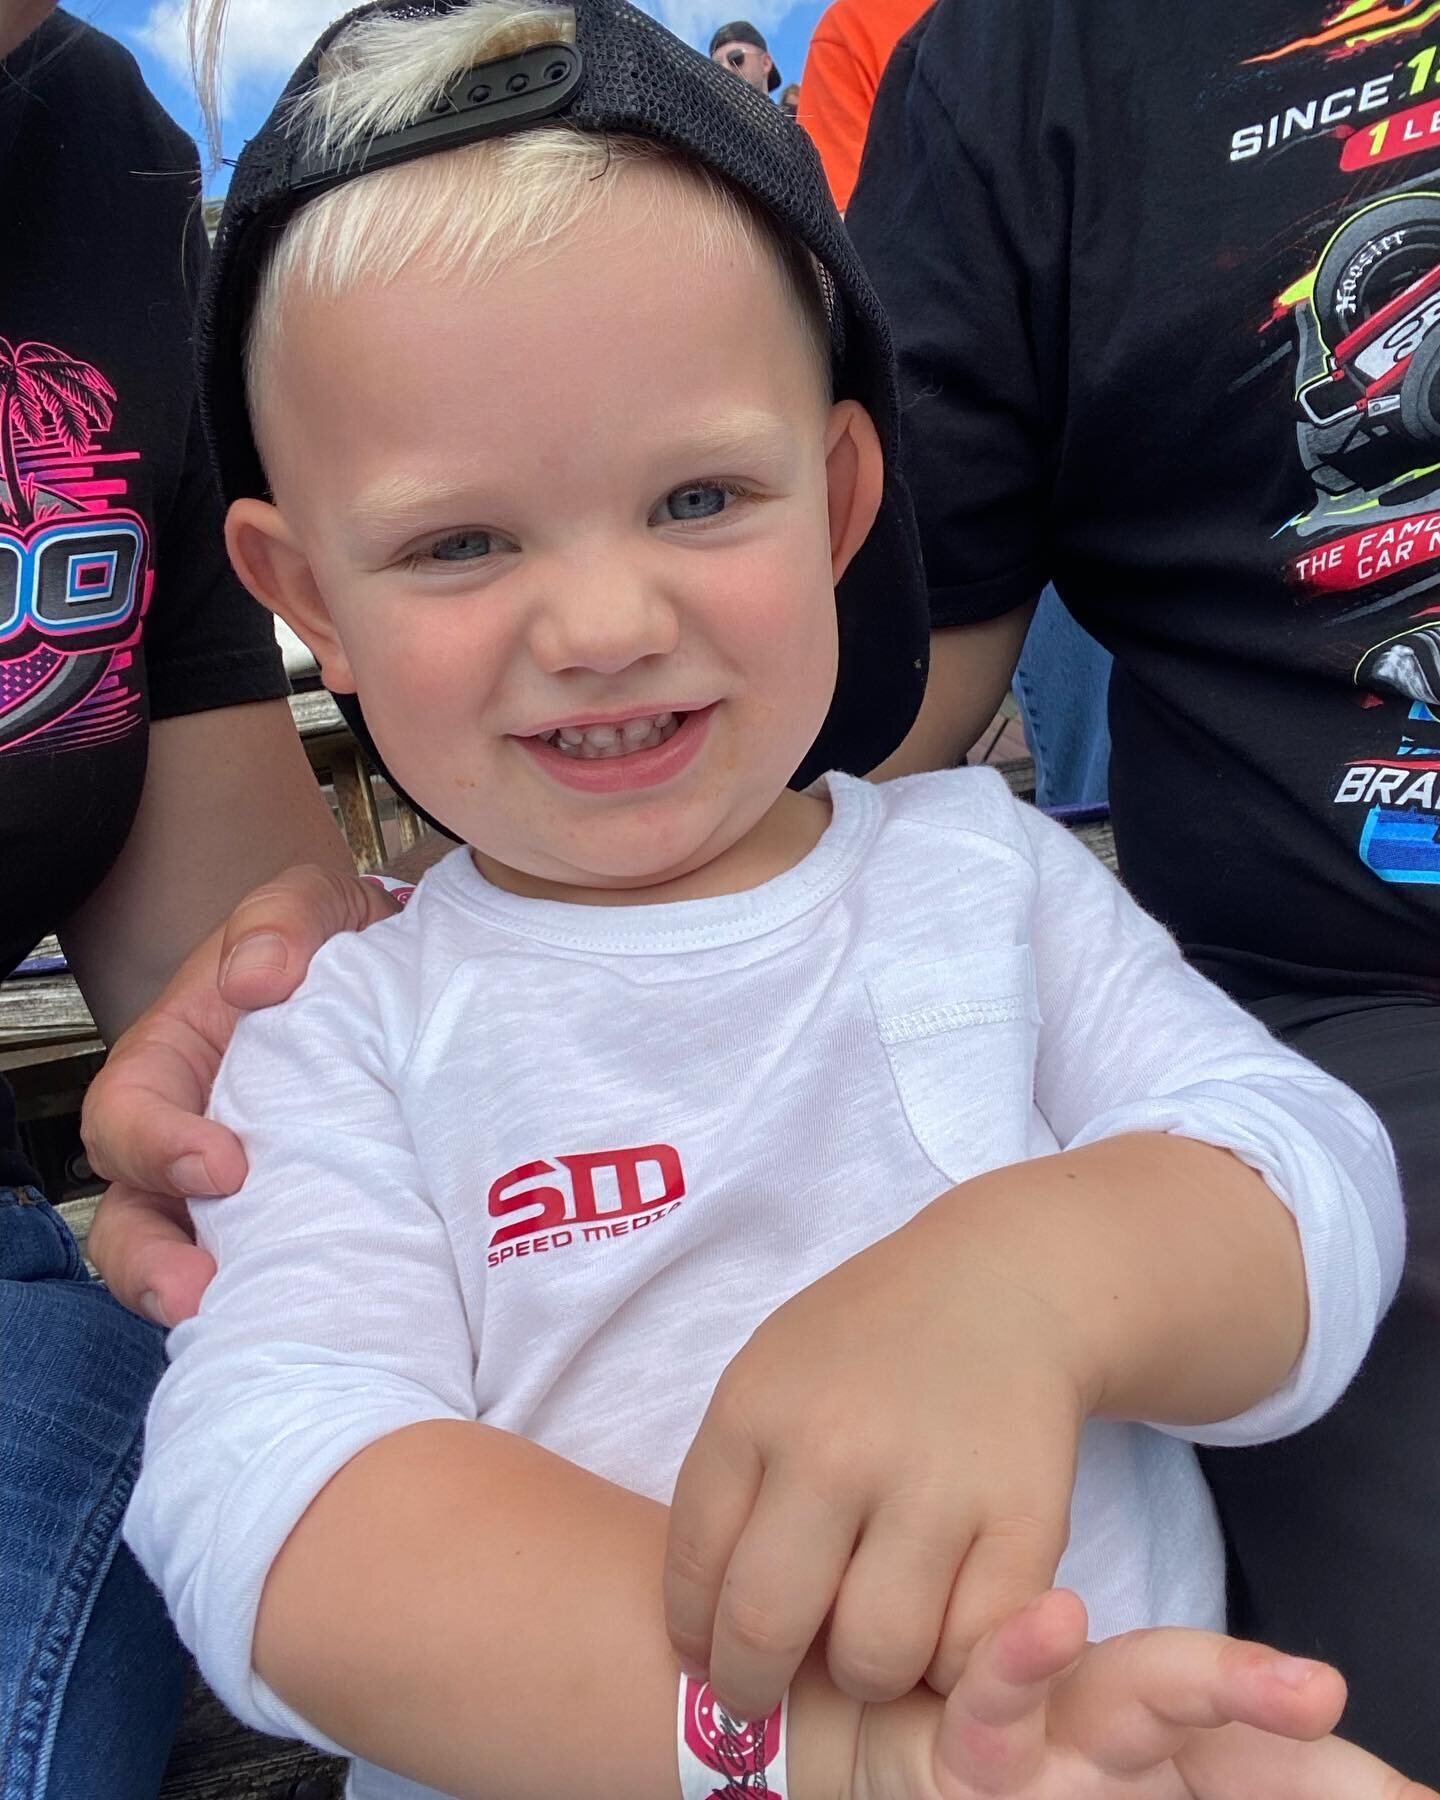 The cutest little race fan sporting his Speed Media shirt for the first time at his first race at @kokomospeedway for the #Smackdown!